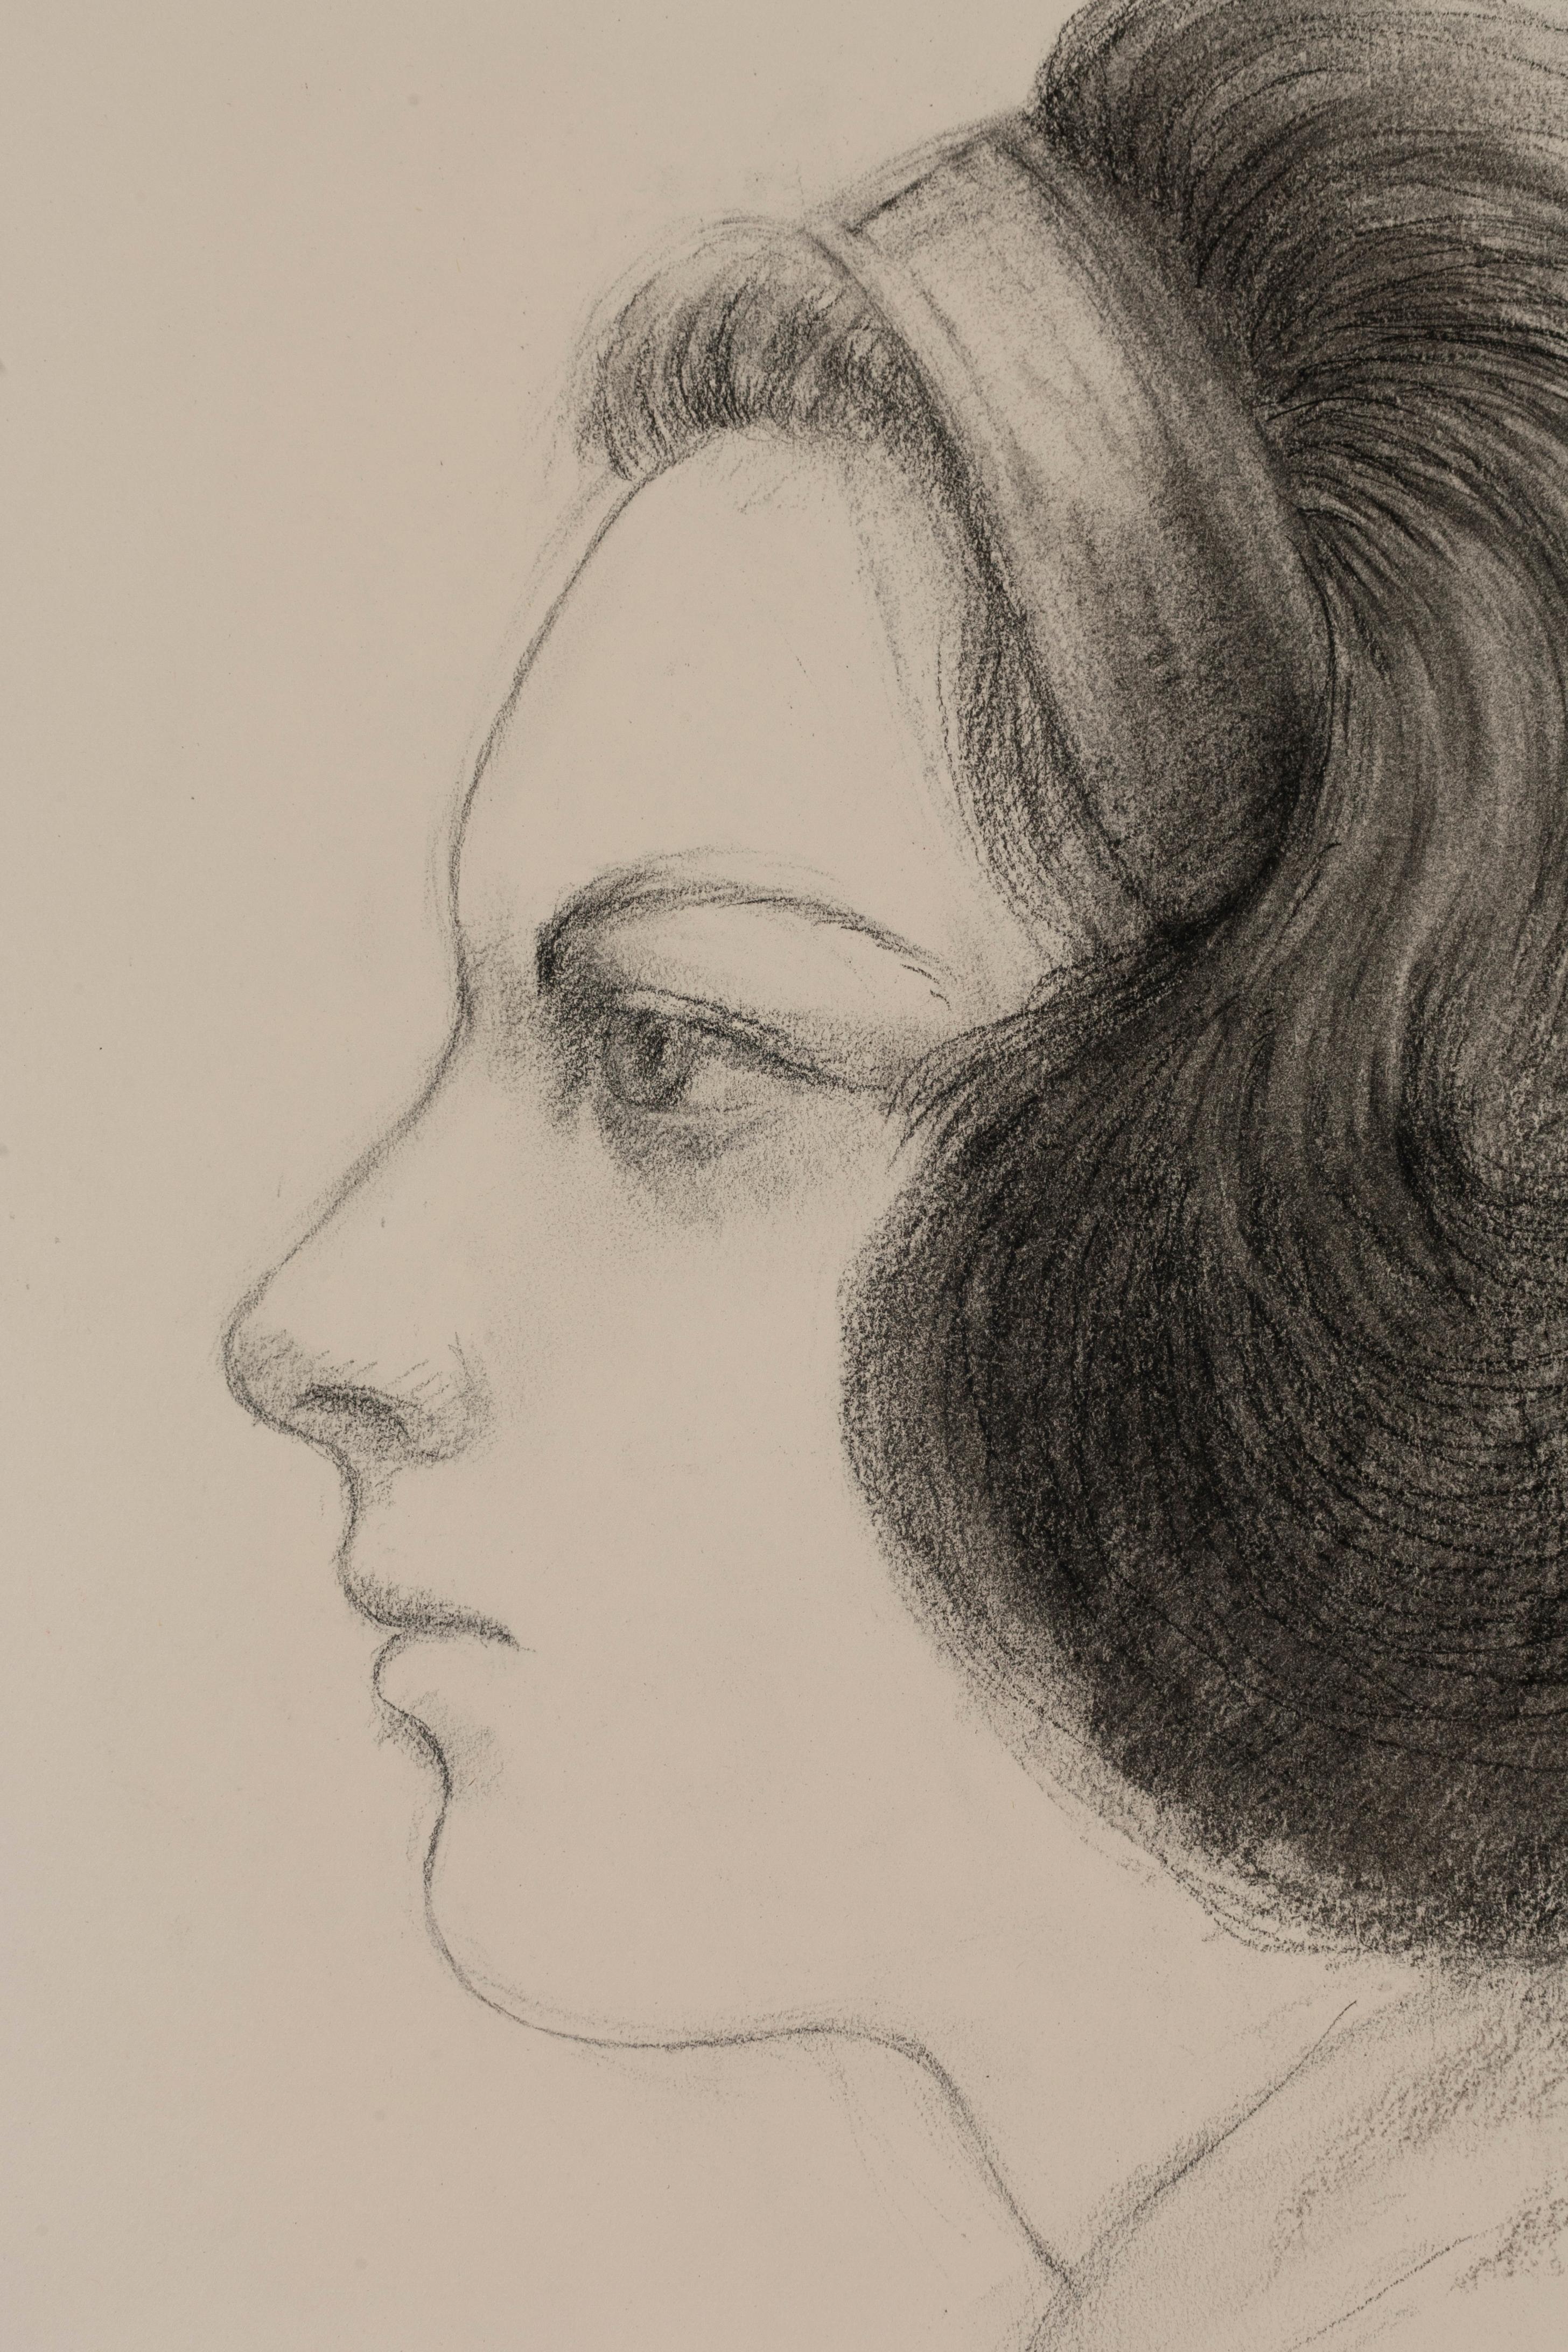 Value Study of Woman's Head in Profile - Art by Jerry Berneche